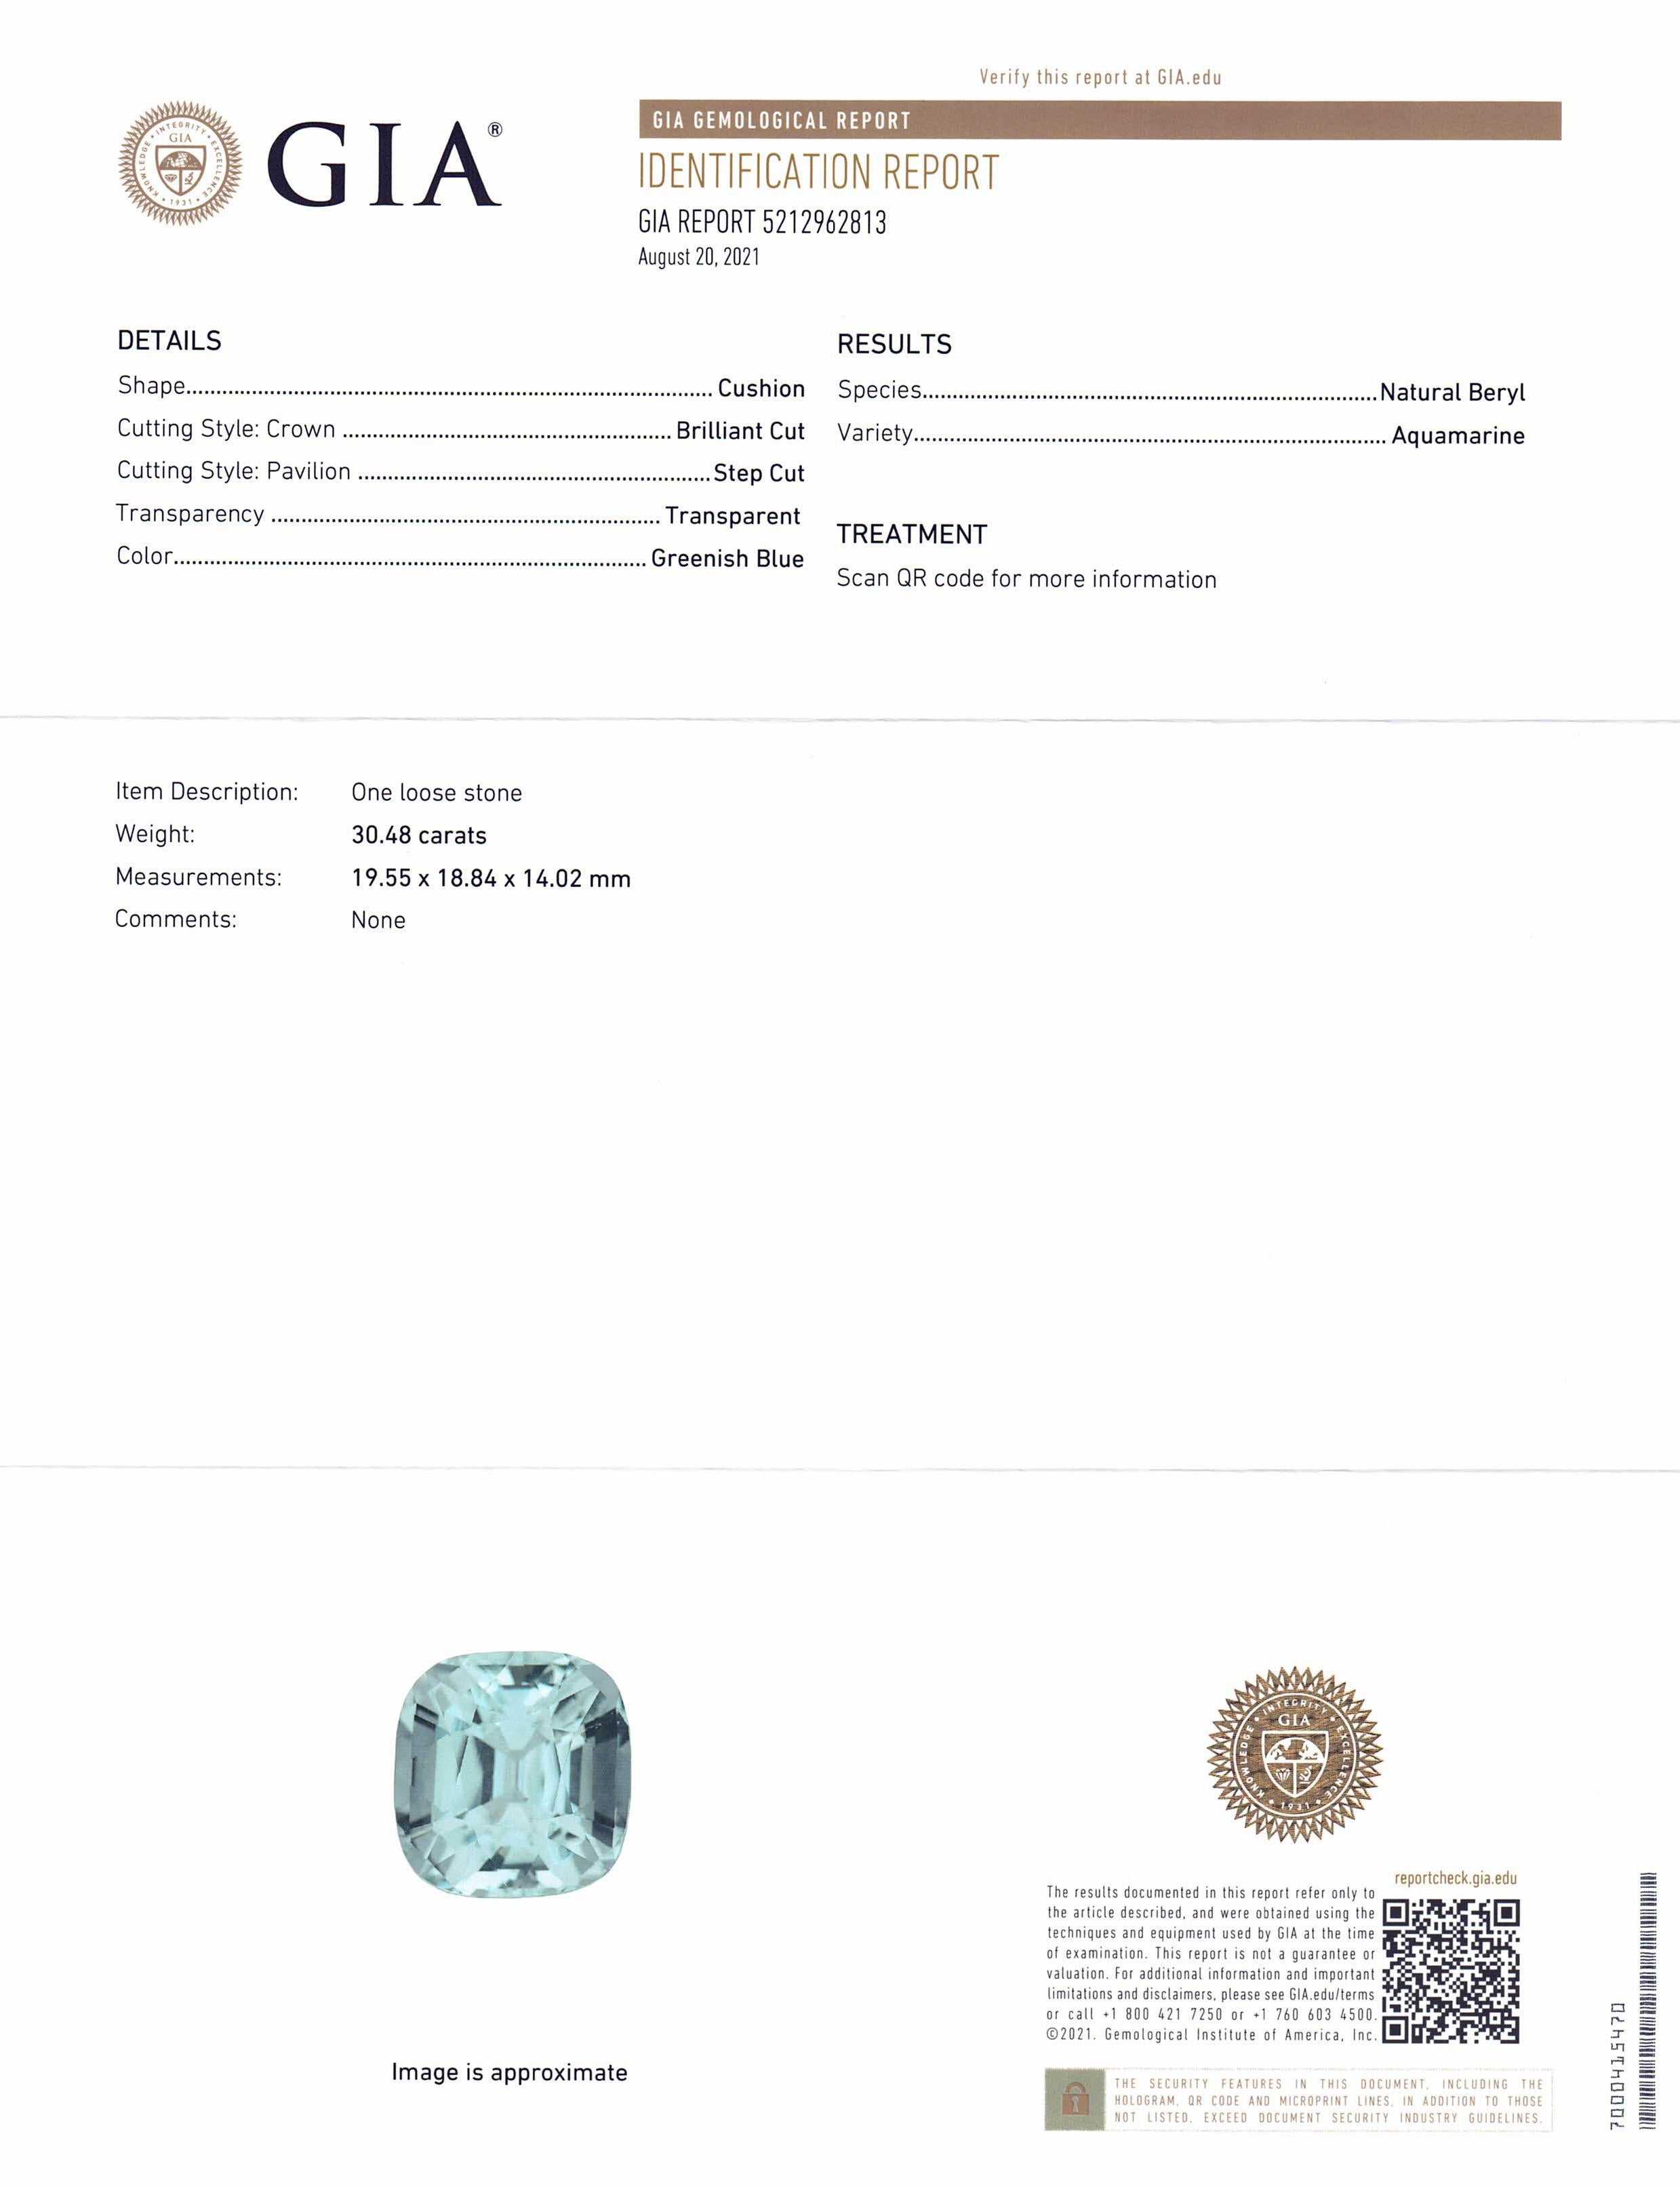 The GIA report reads as follows:

GIA Report Number: 5212962813
Shape: Cushion
Cutting Style:
Cutting Style: Crown: Brilliant Cut
Cutting Style: Pavilion: Step Cut
Transparency: Transparent
Color: Greenish Blue

 

RESULTS
Species: Natural